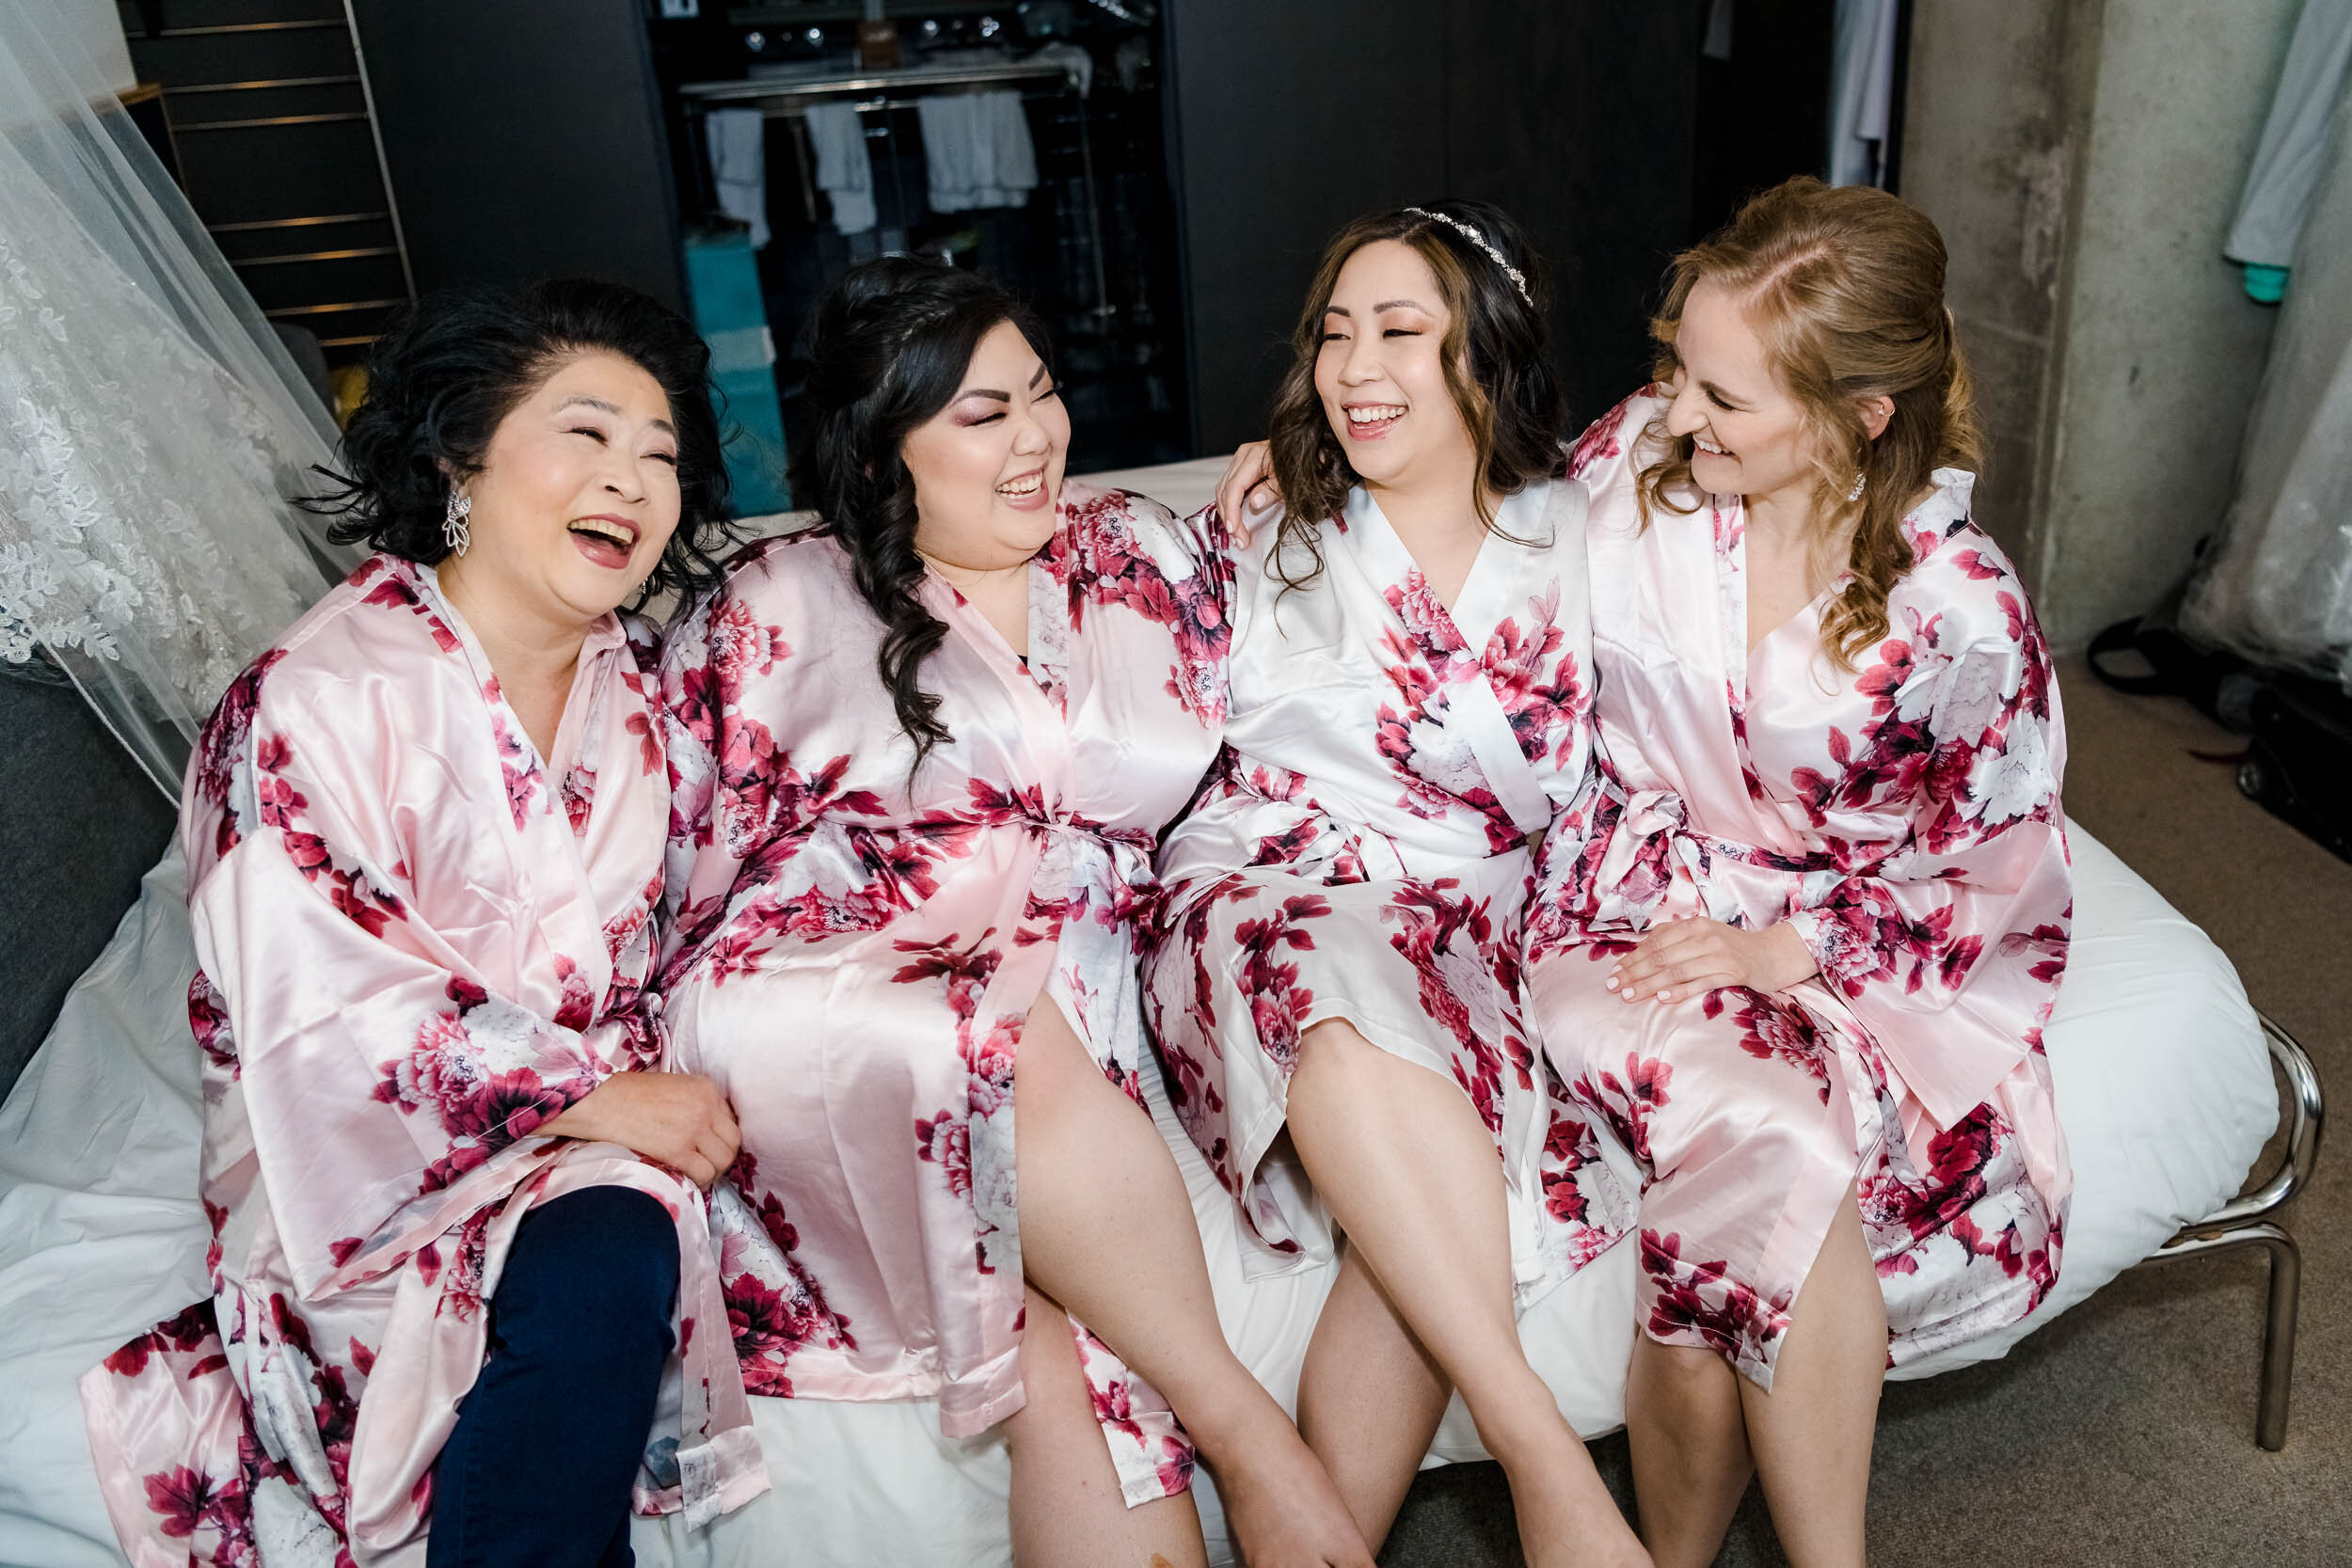 Top Wedding Photographers Near Me | Ace Hotel | J. Brown Photography | robe photo of bride and bridesmaids.